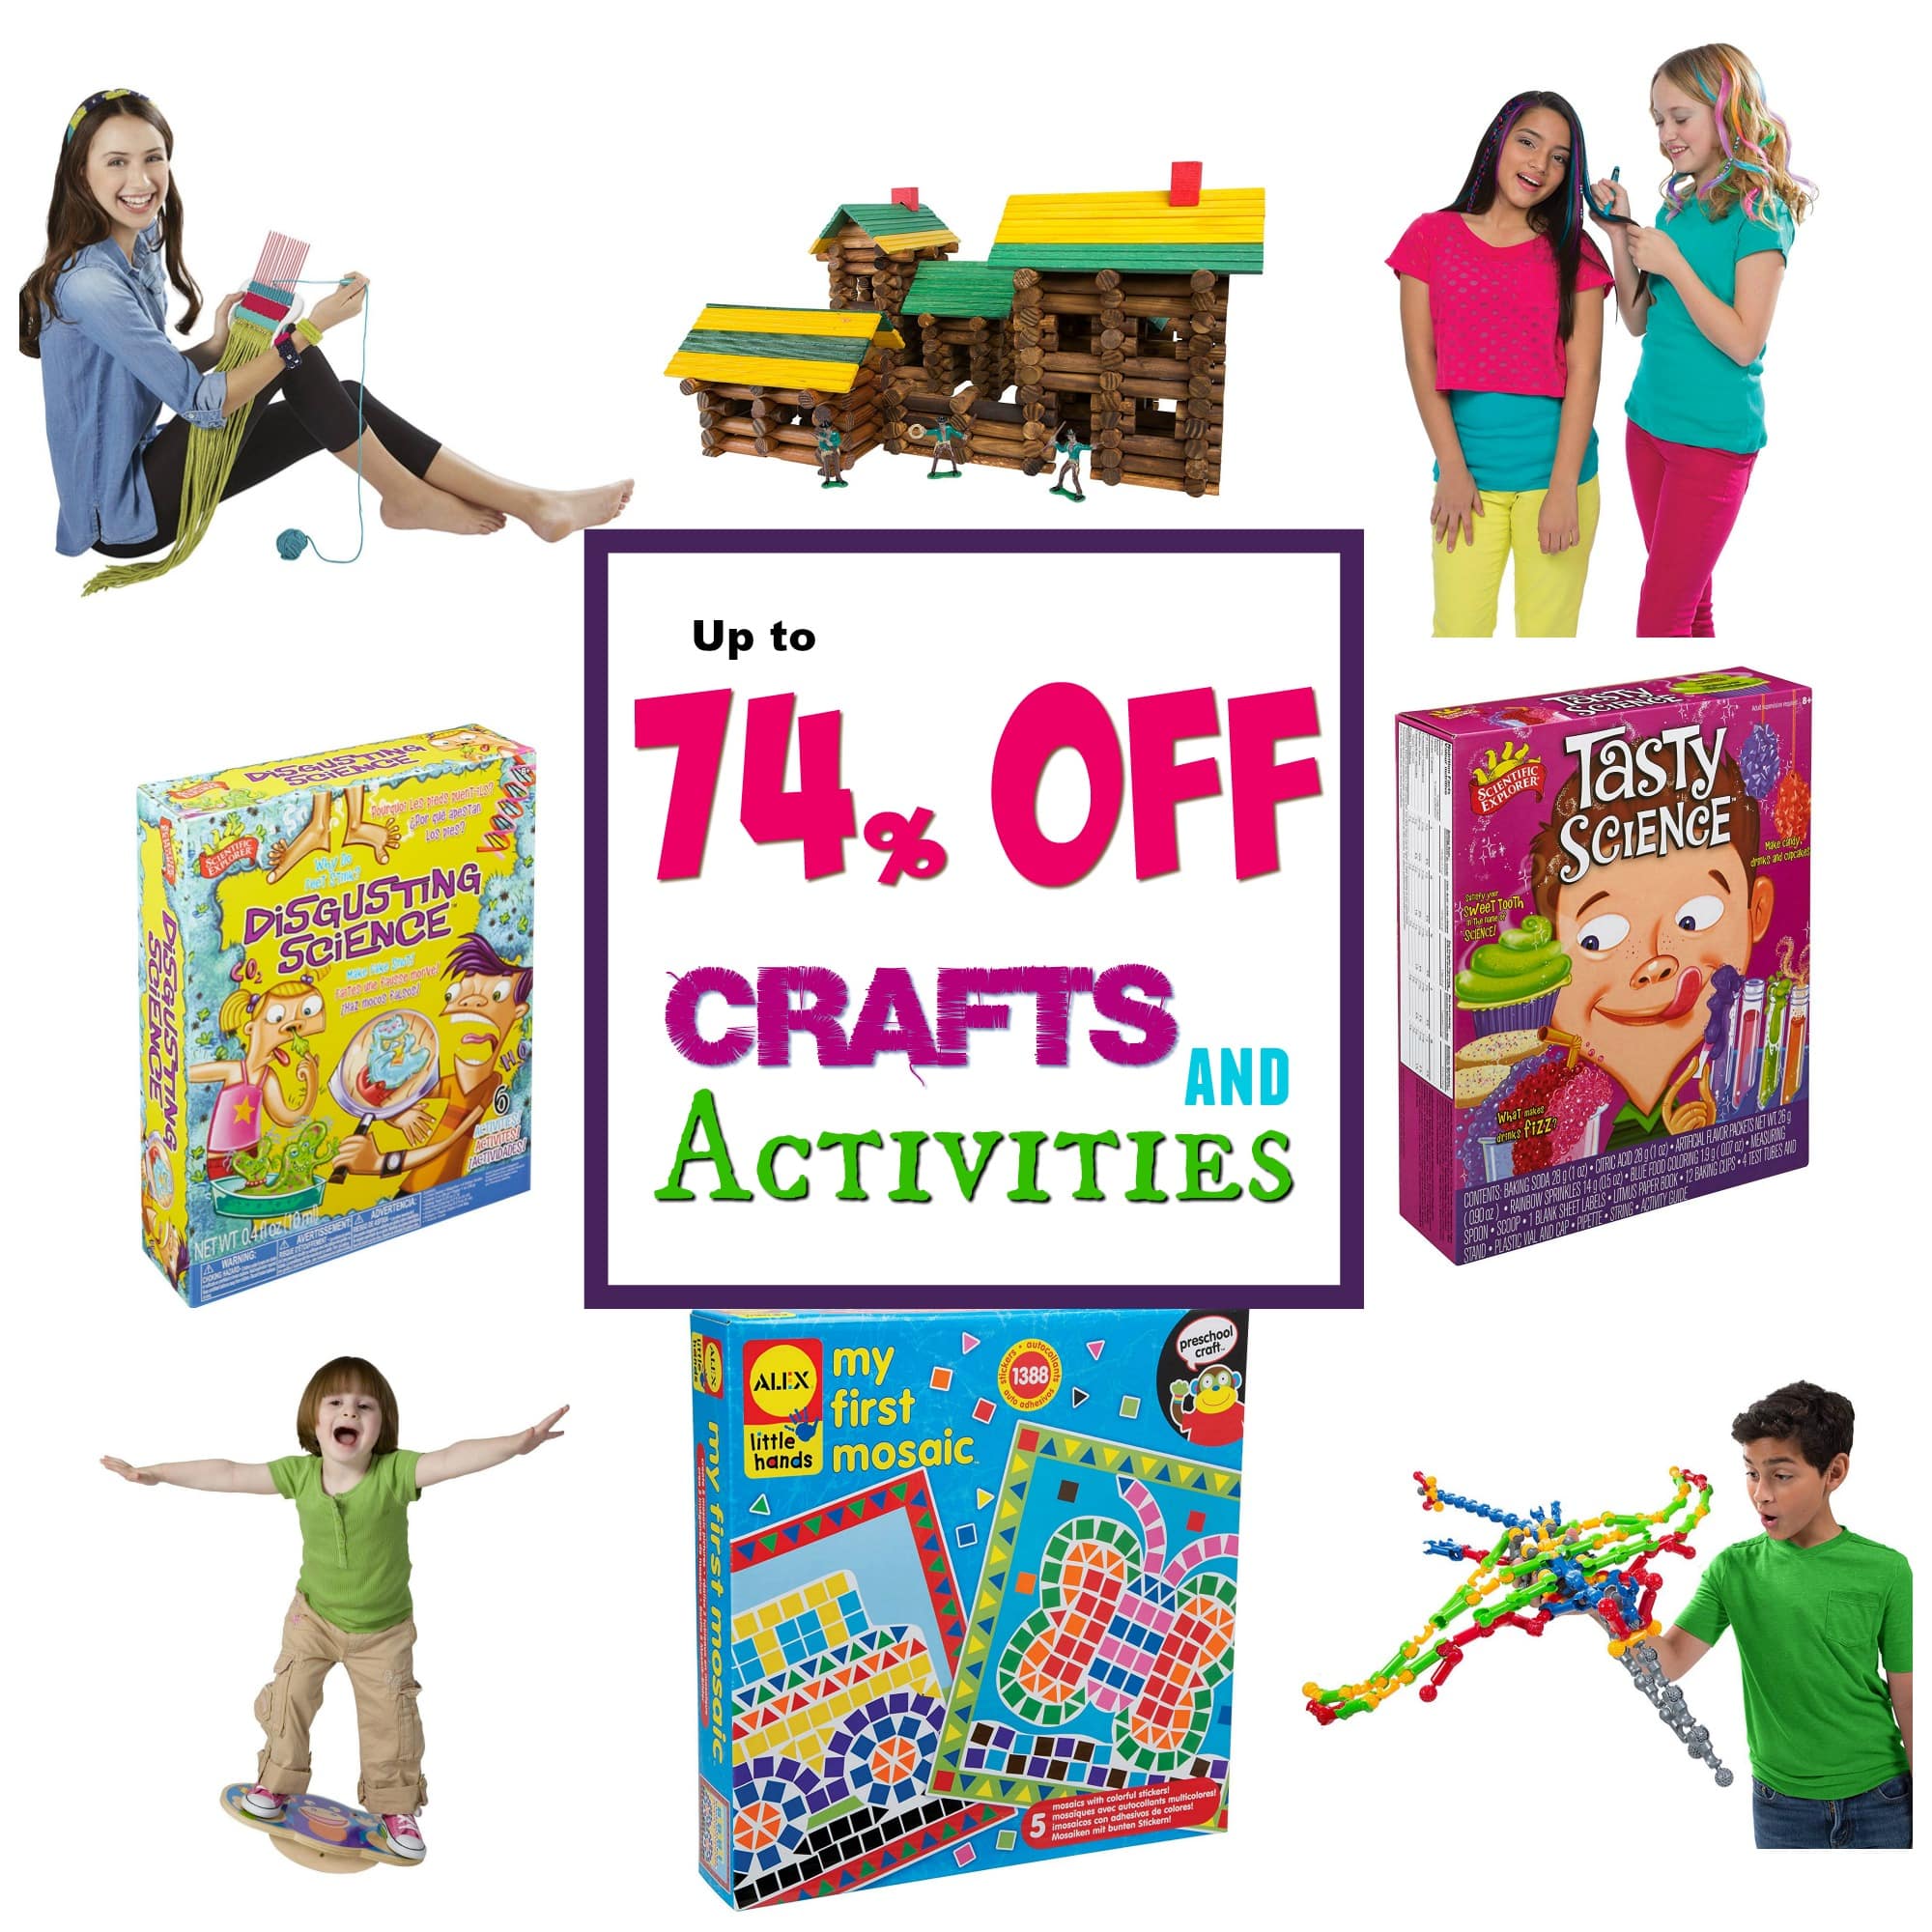 DEAL OF THE DAY: Alex Crafts and Activities up to 74% off!